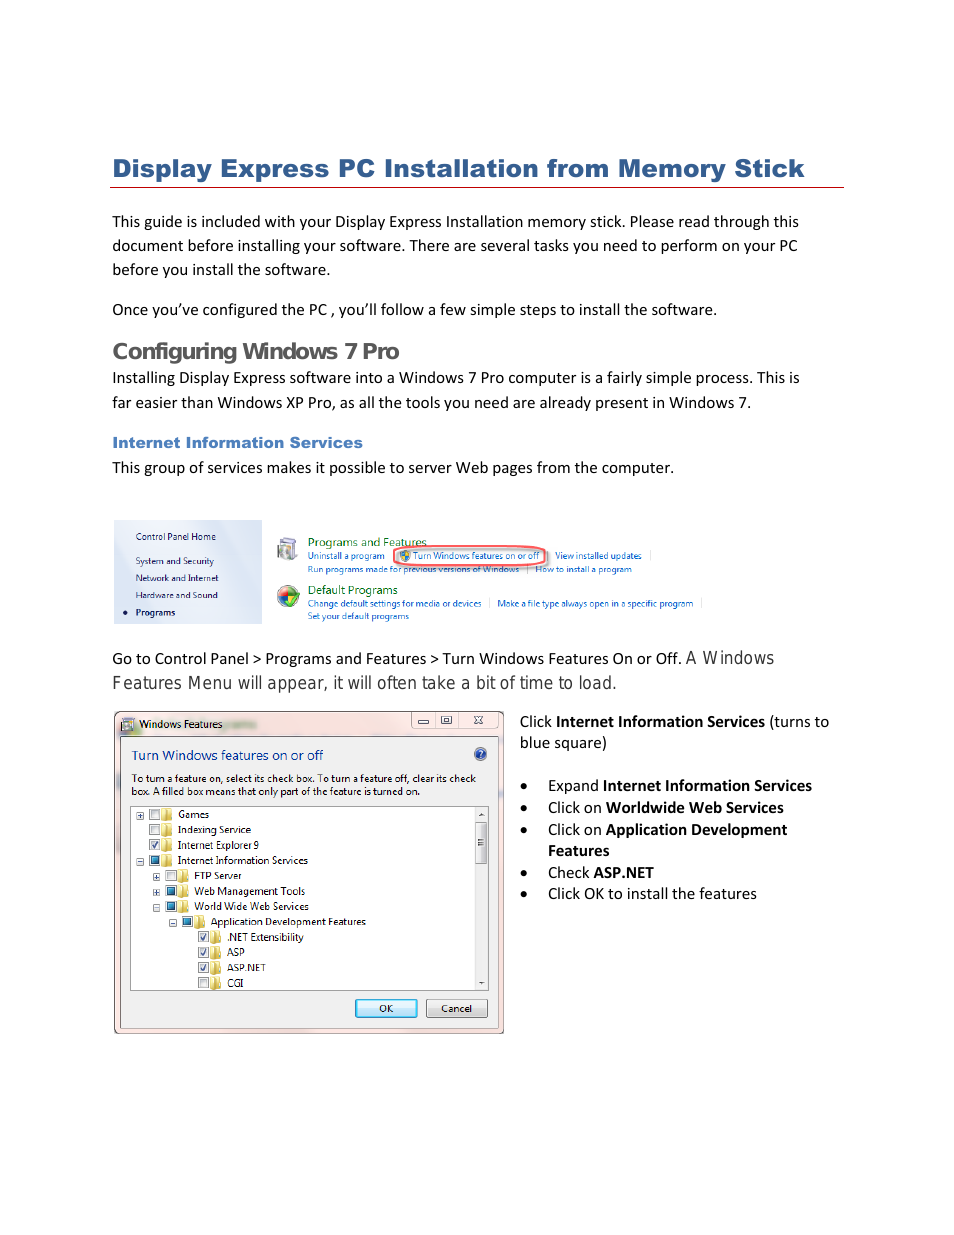 SW-DX Installation from Memory Stick